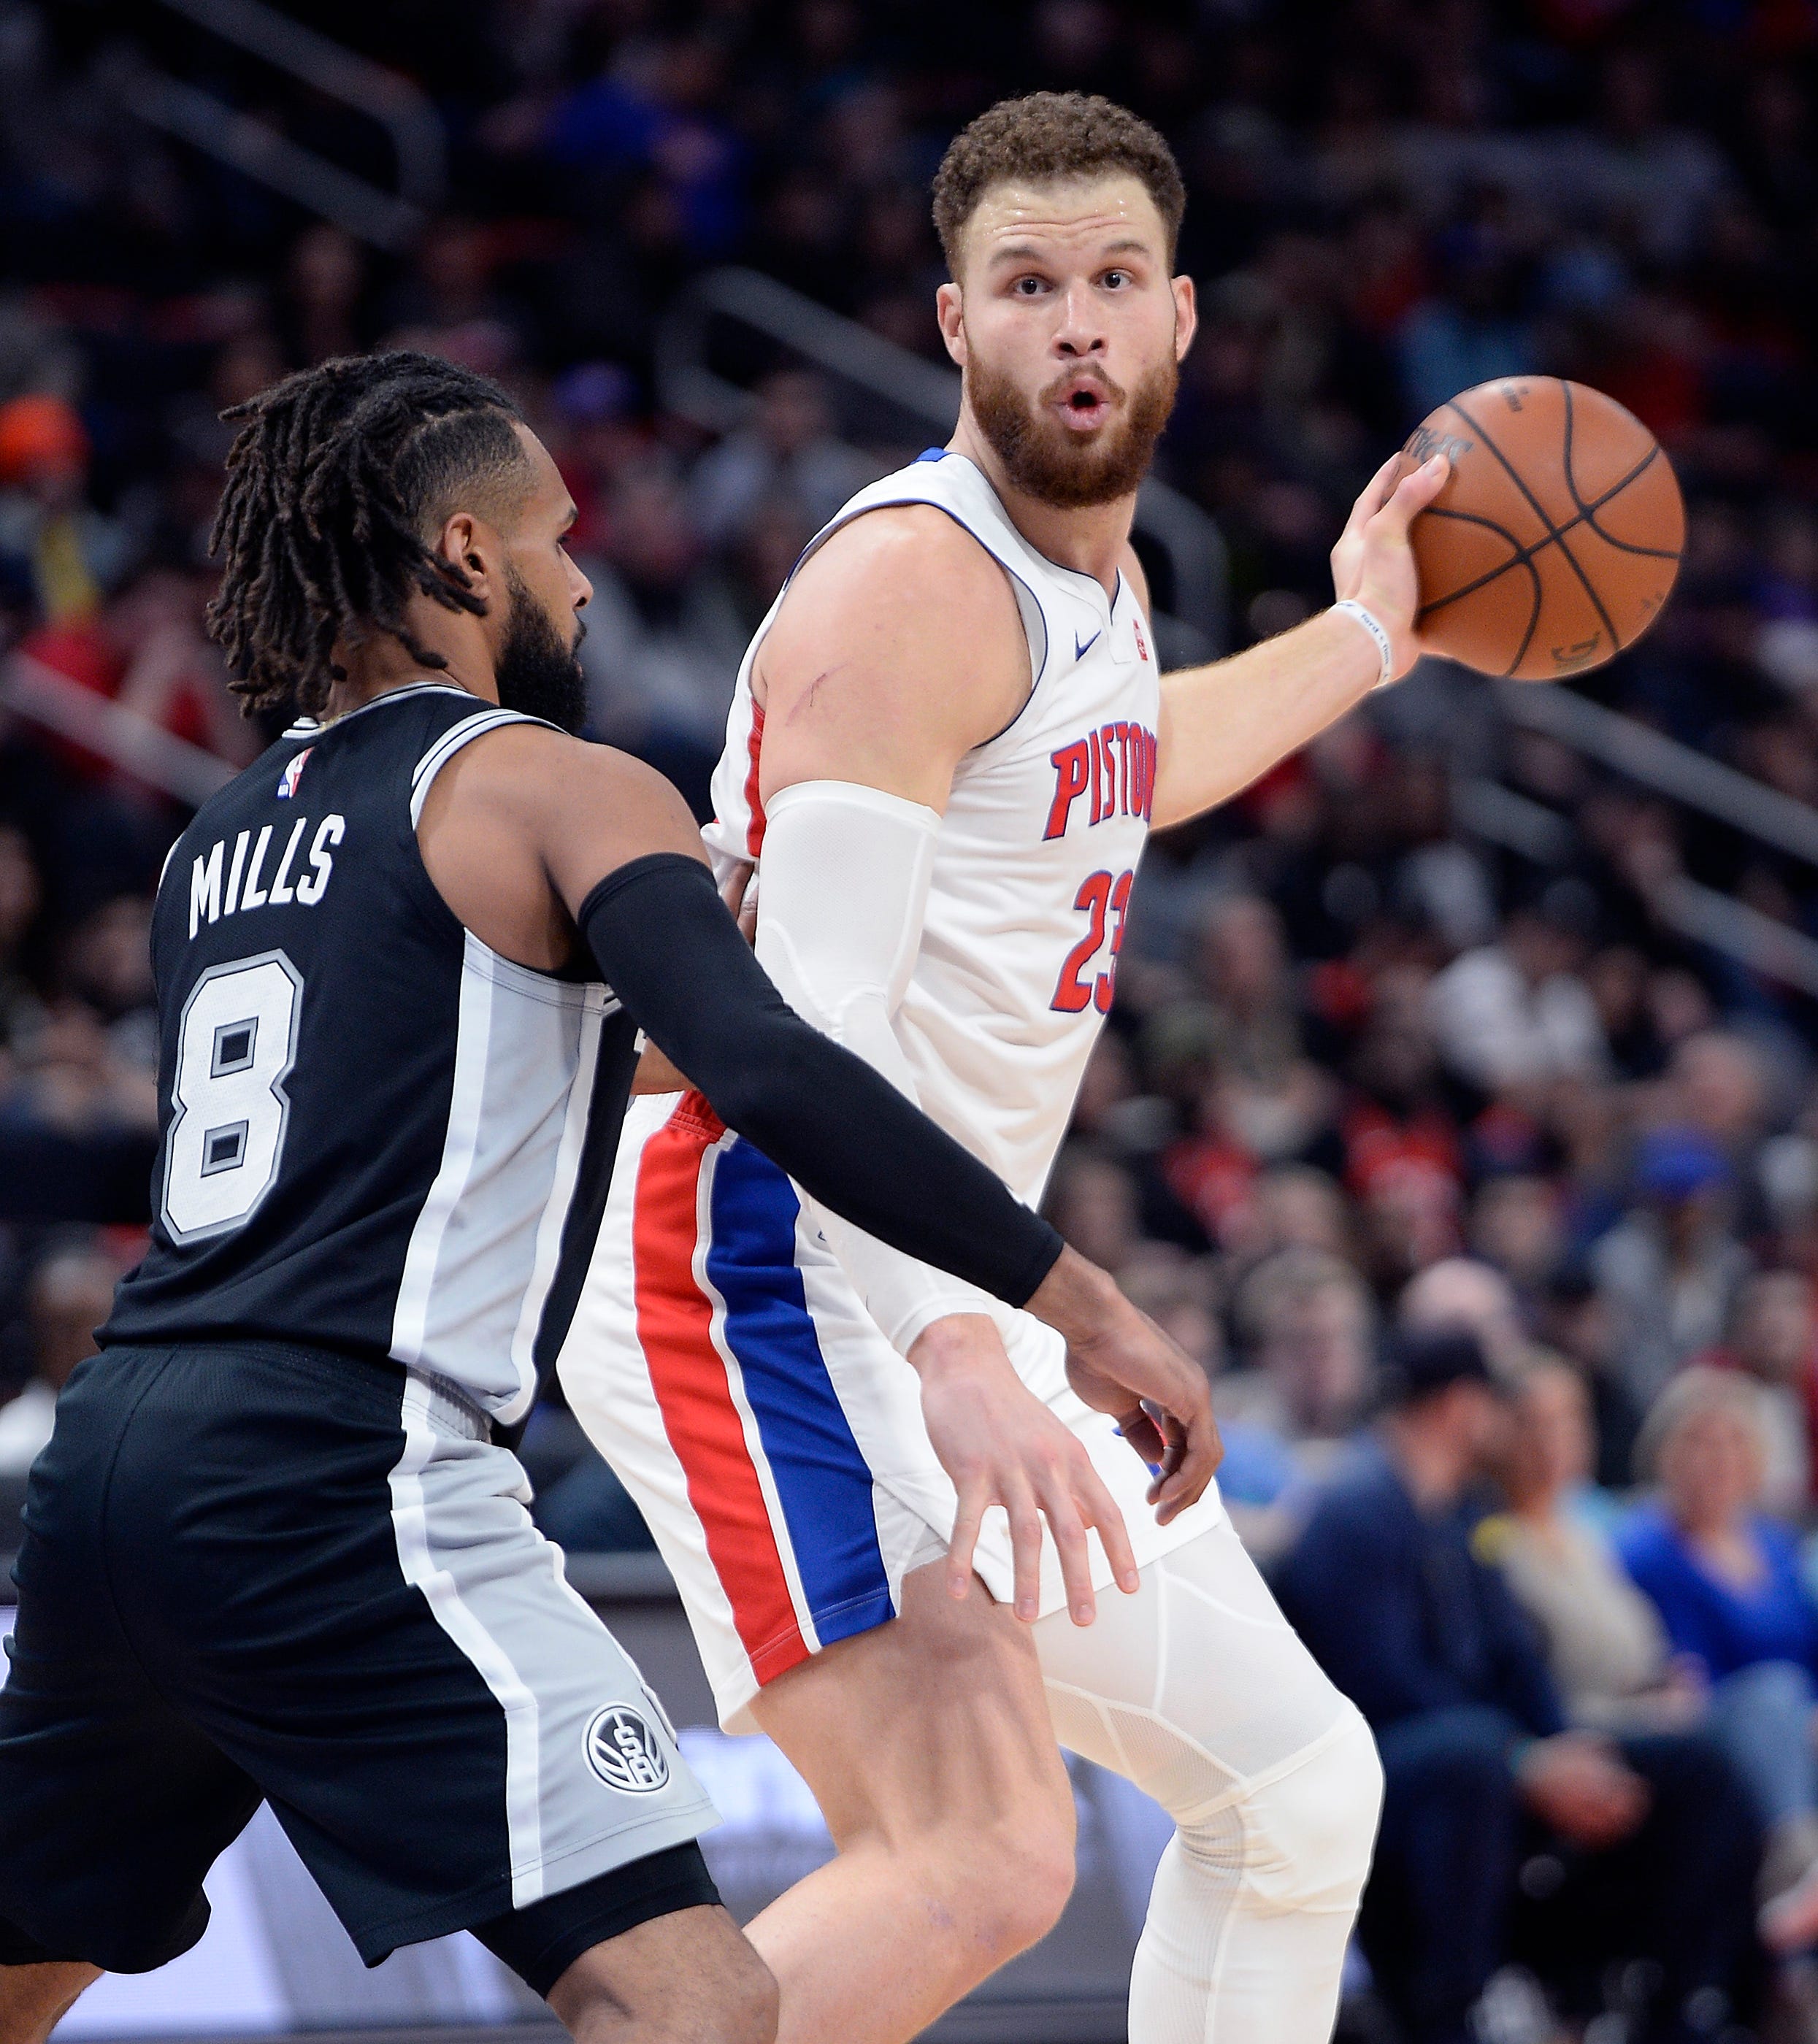 Pistons forward Blake Griffin was named to Sports Illustrated's NBA All-Decade Third Team.